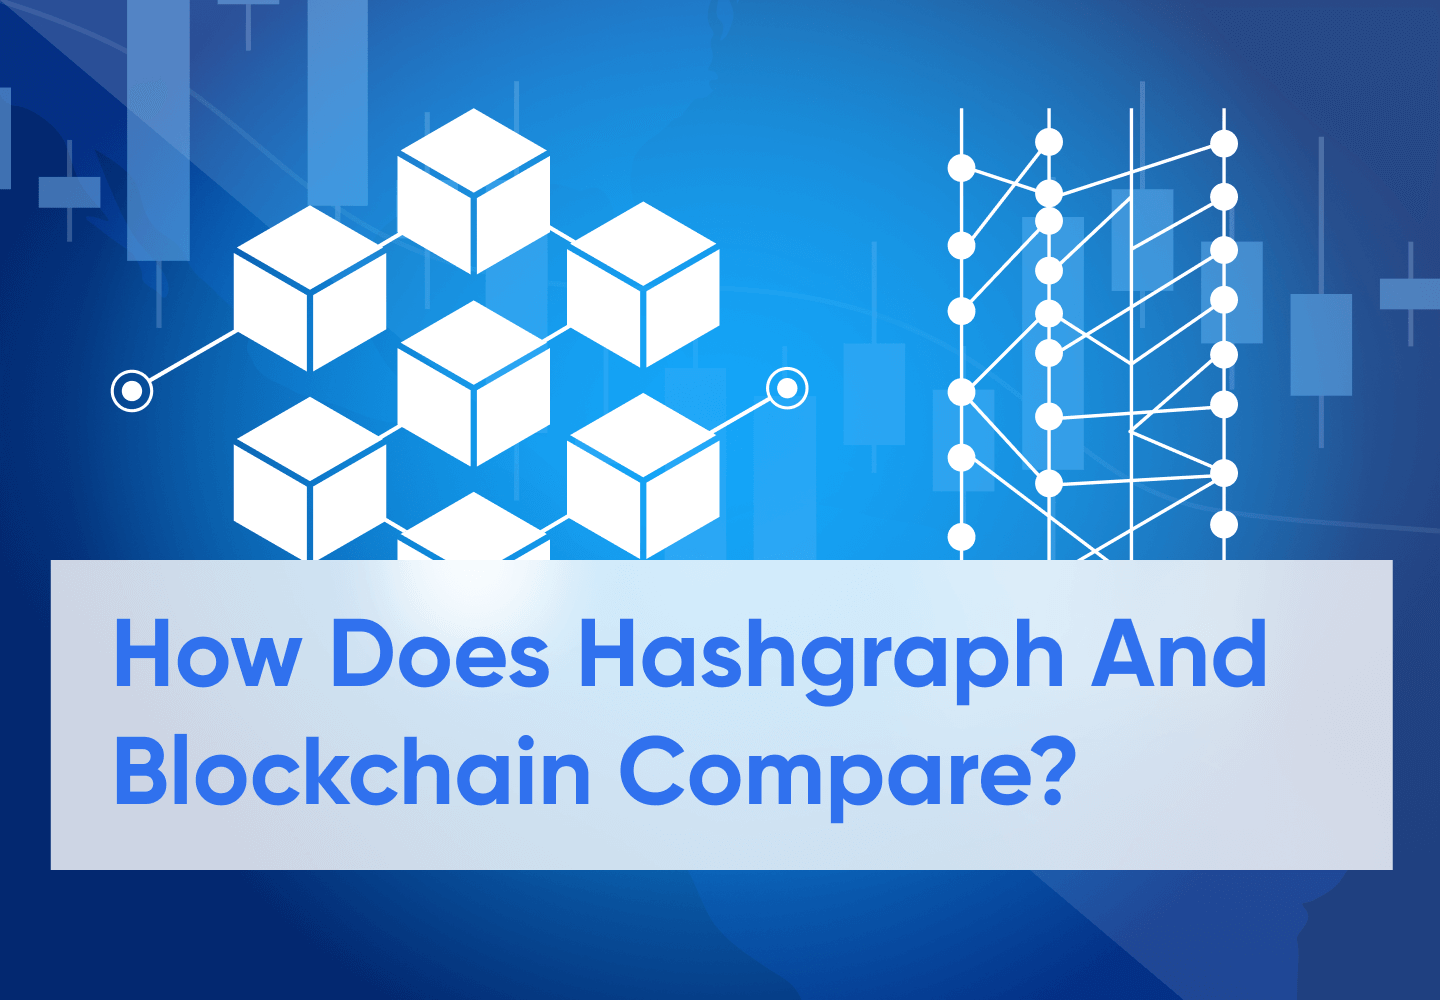 Hedera hashgraph vs. blockchain, Differentiating Two Distributed Ledger Technologies